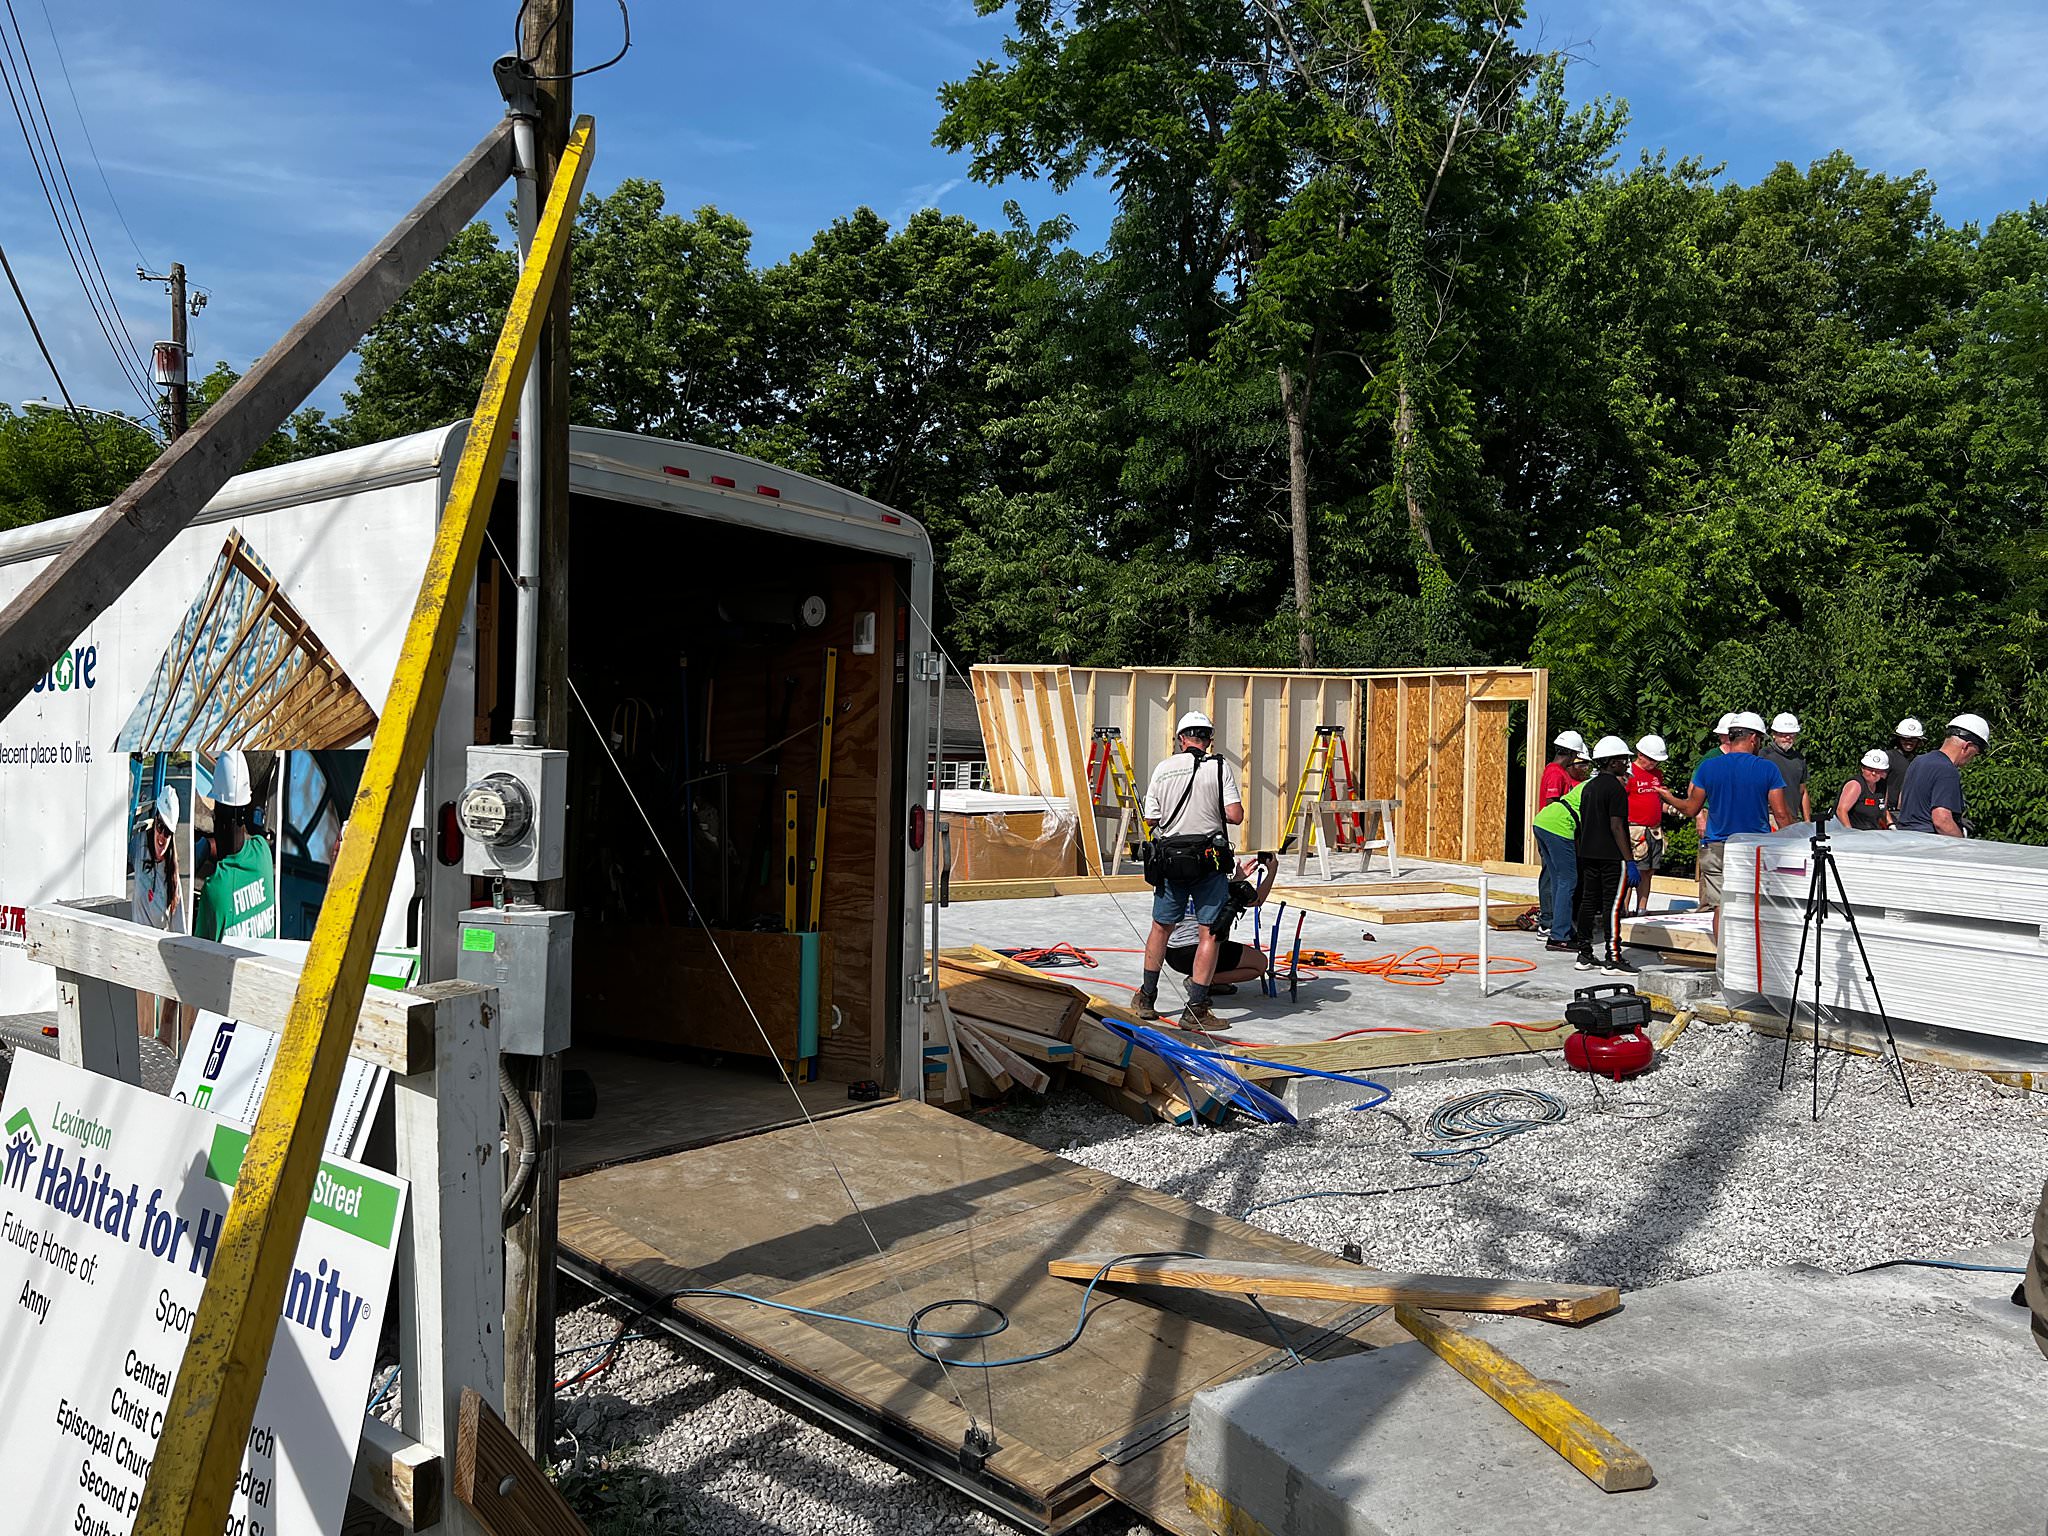 Participants working at Habitat for Humanity